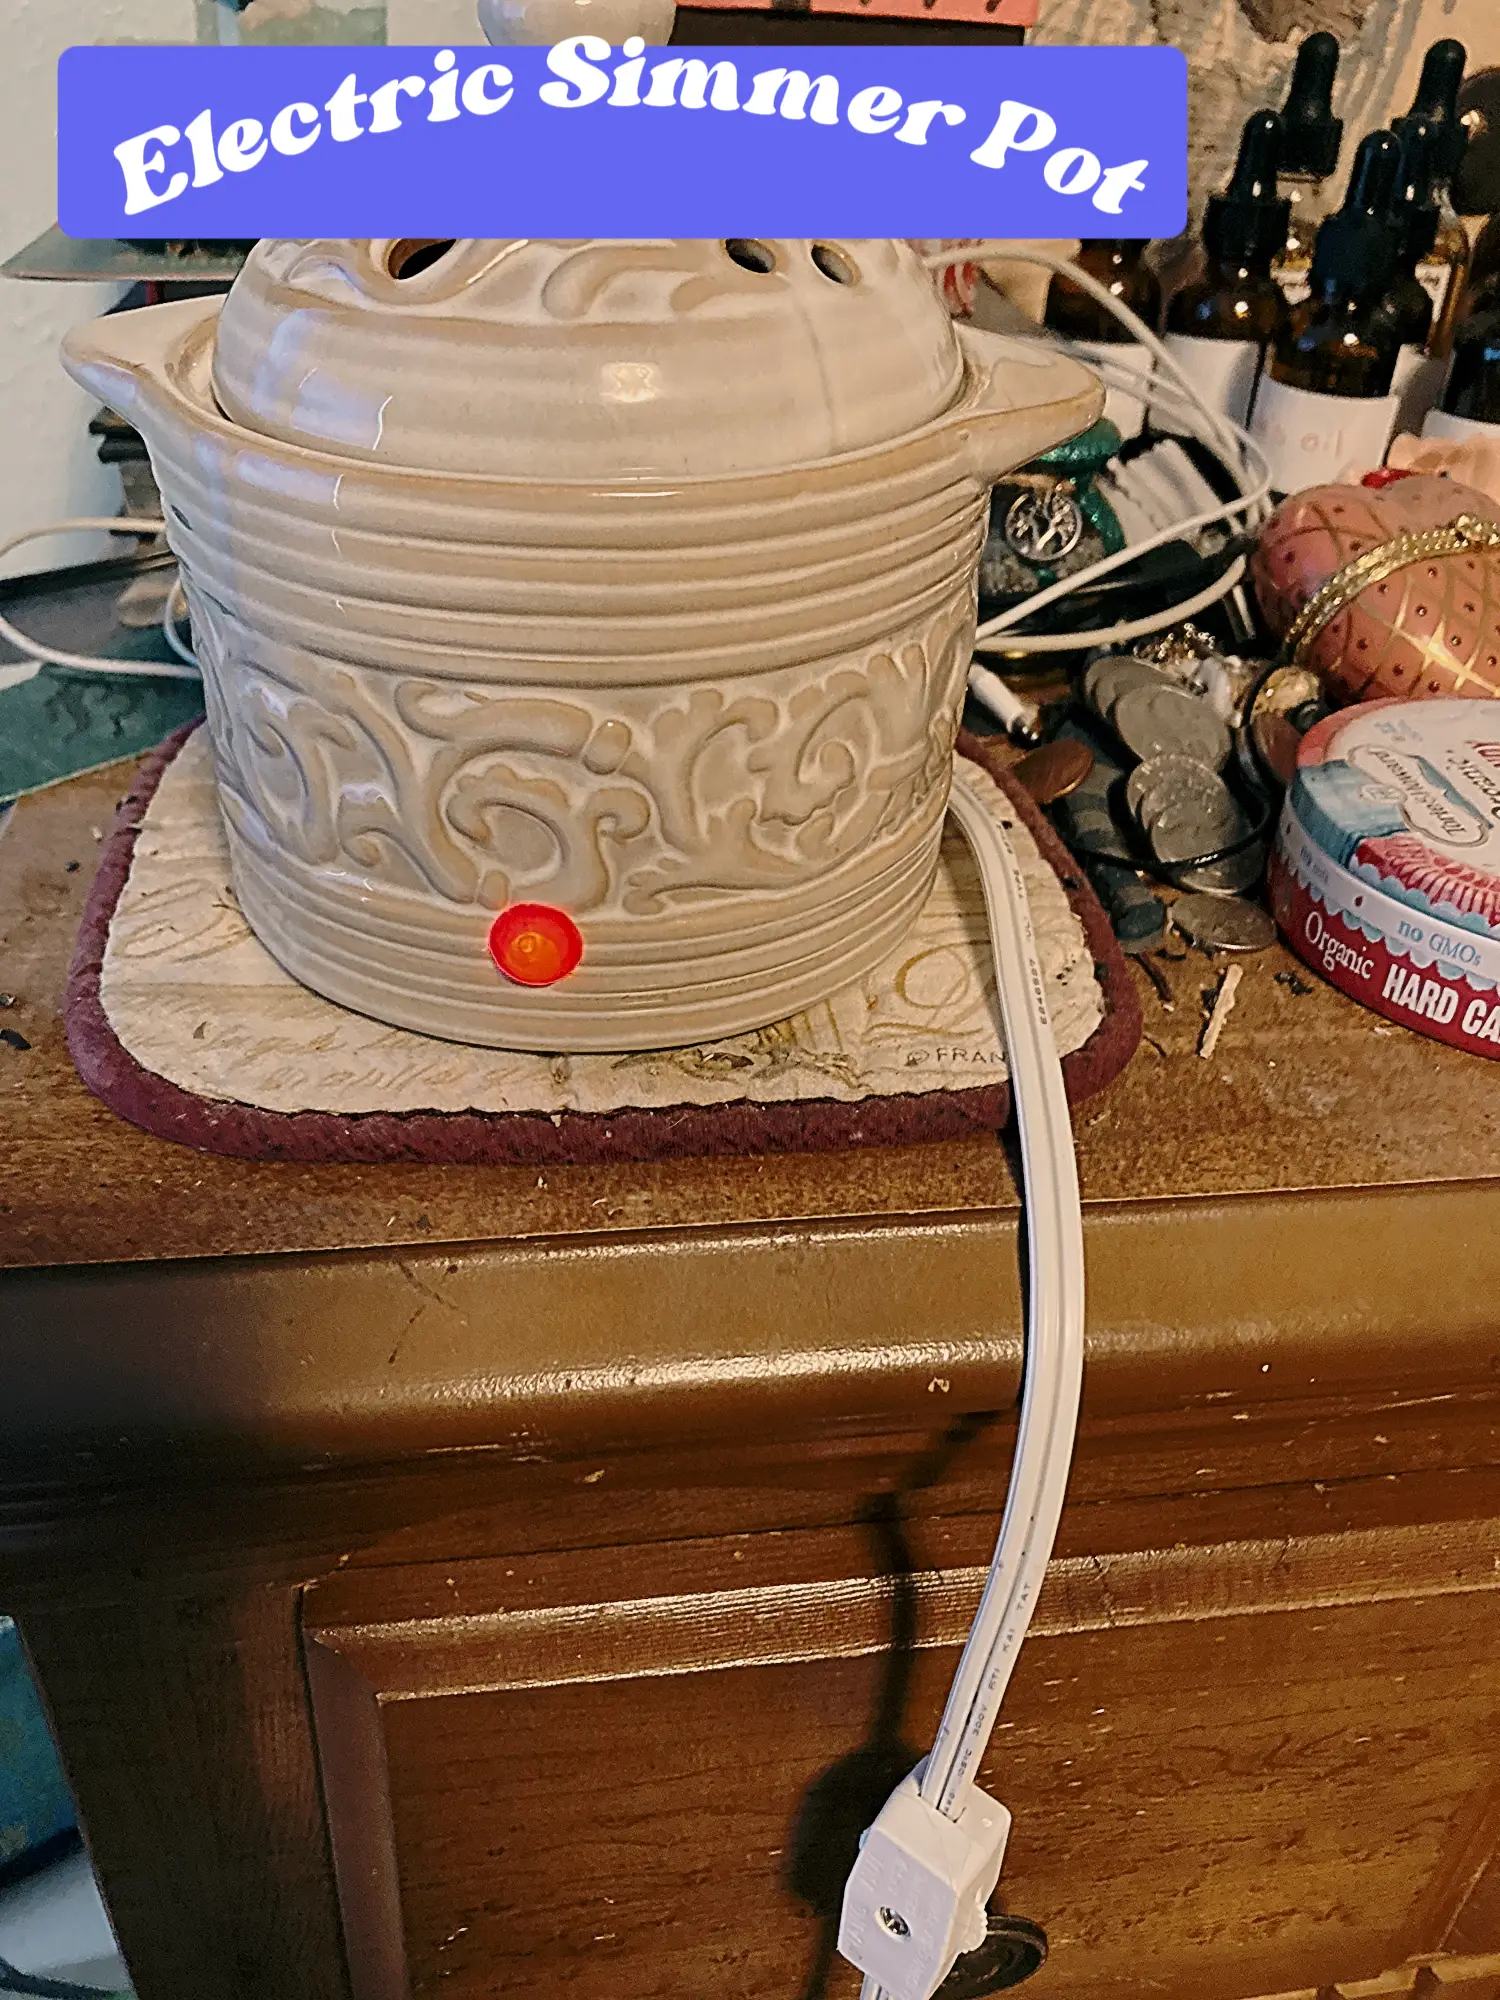 Electric Simmer Pot, Gallery posted by ThatLazyWitch